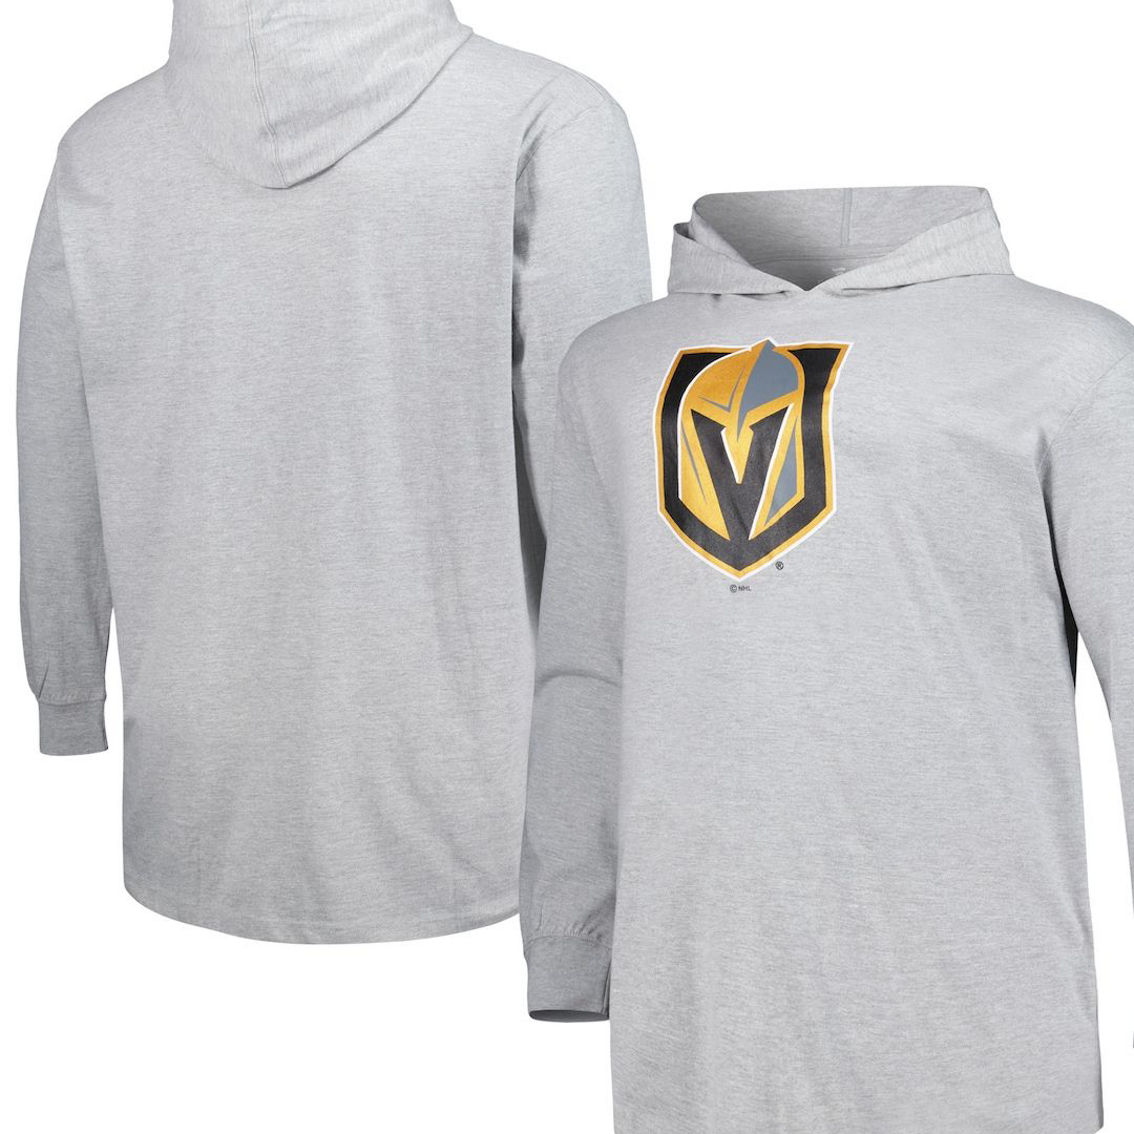 Profile Men's Heather Gray Vegas Golden Knights Big & Tall Pullover Hoodie - Image 2 of 4